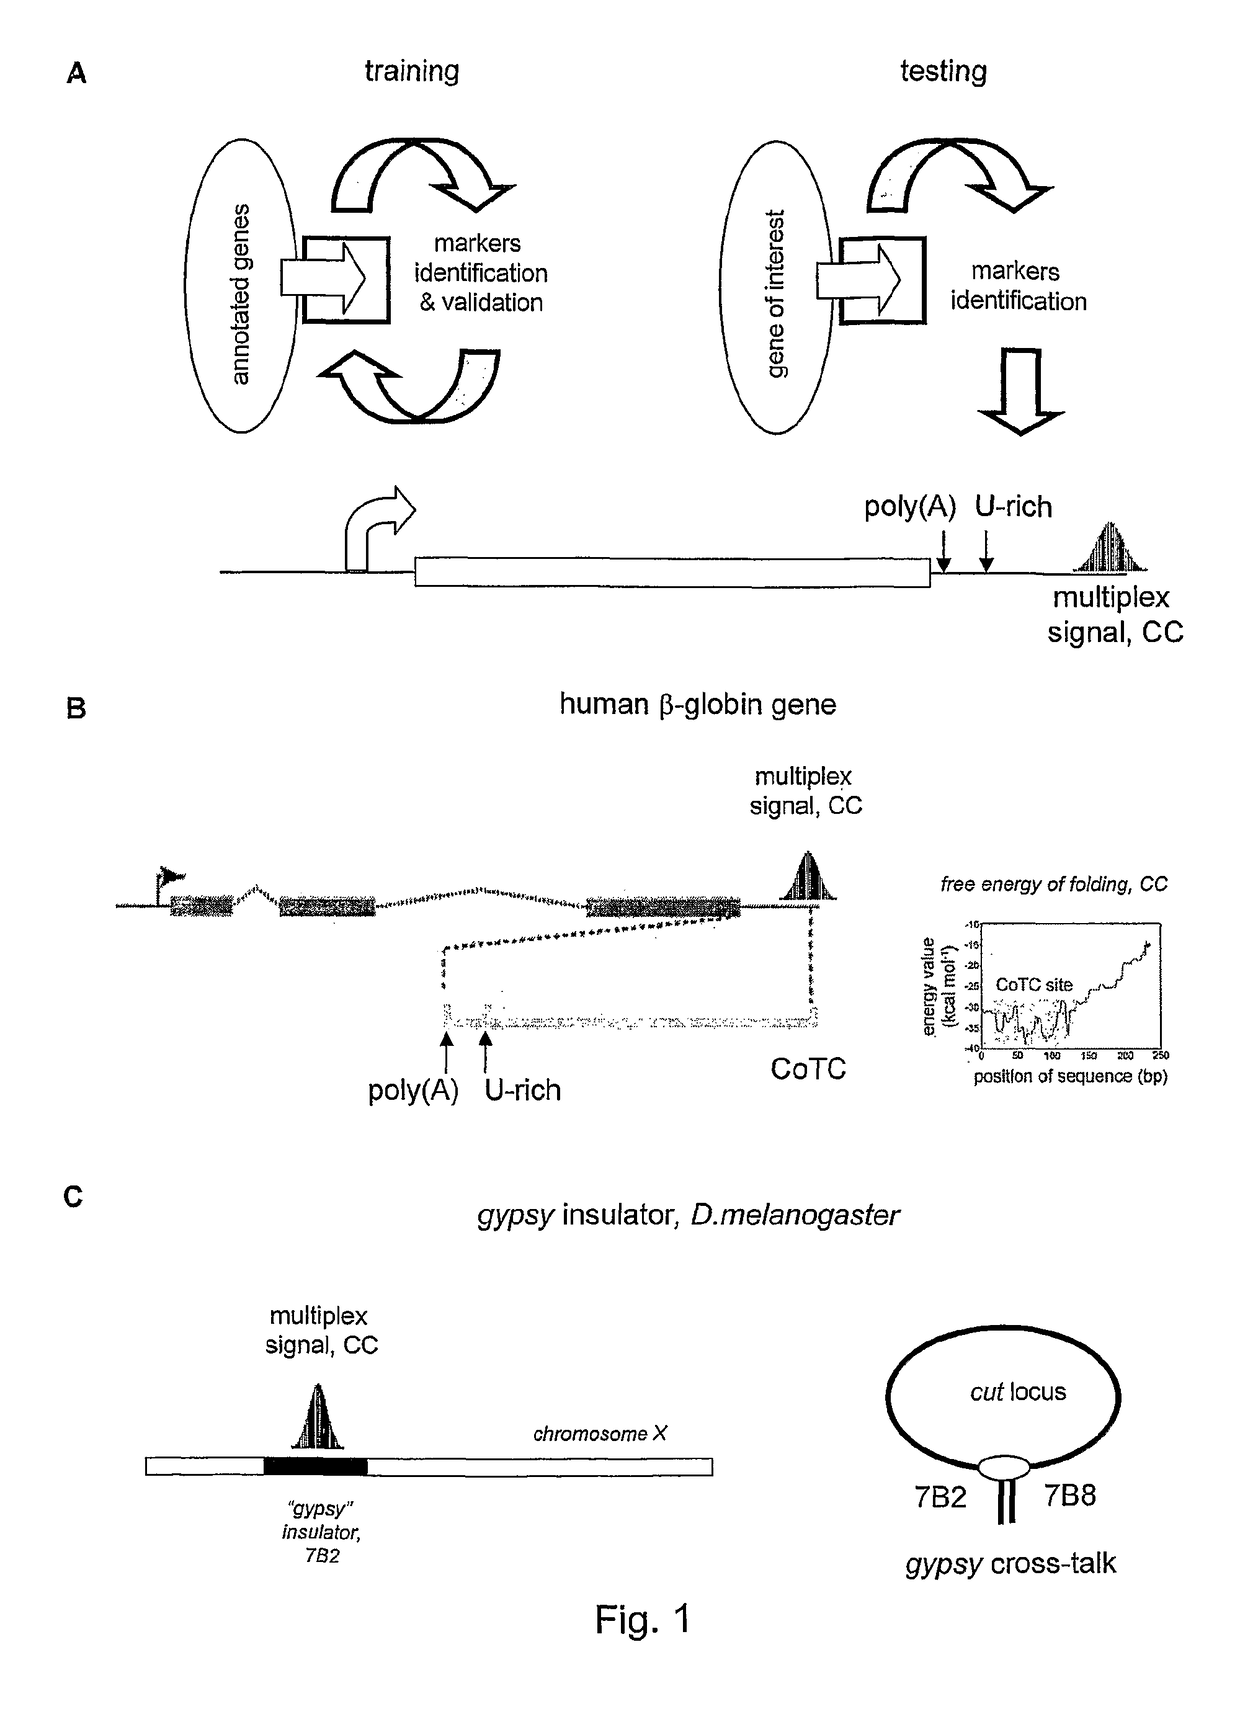 DNA conformation (loop structures) in normal and abnormal gene expression